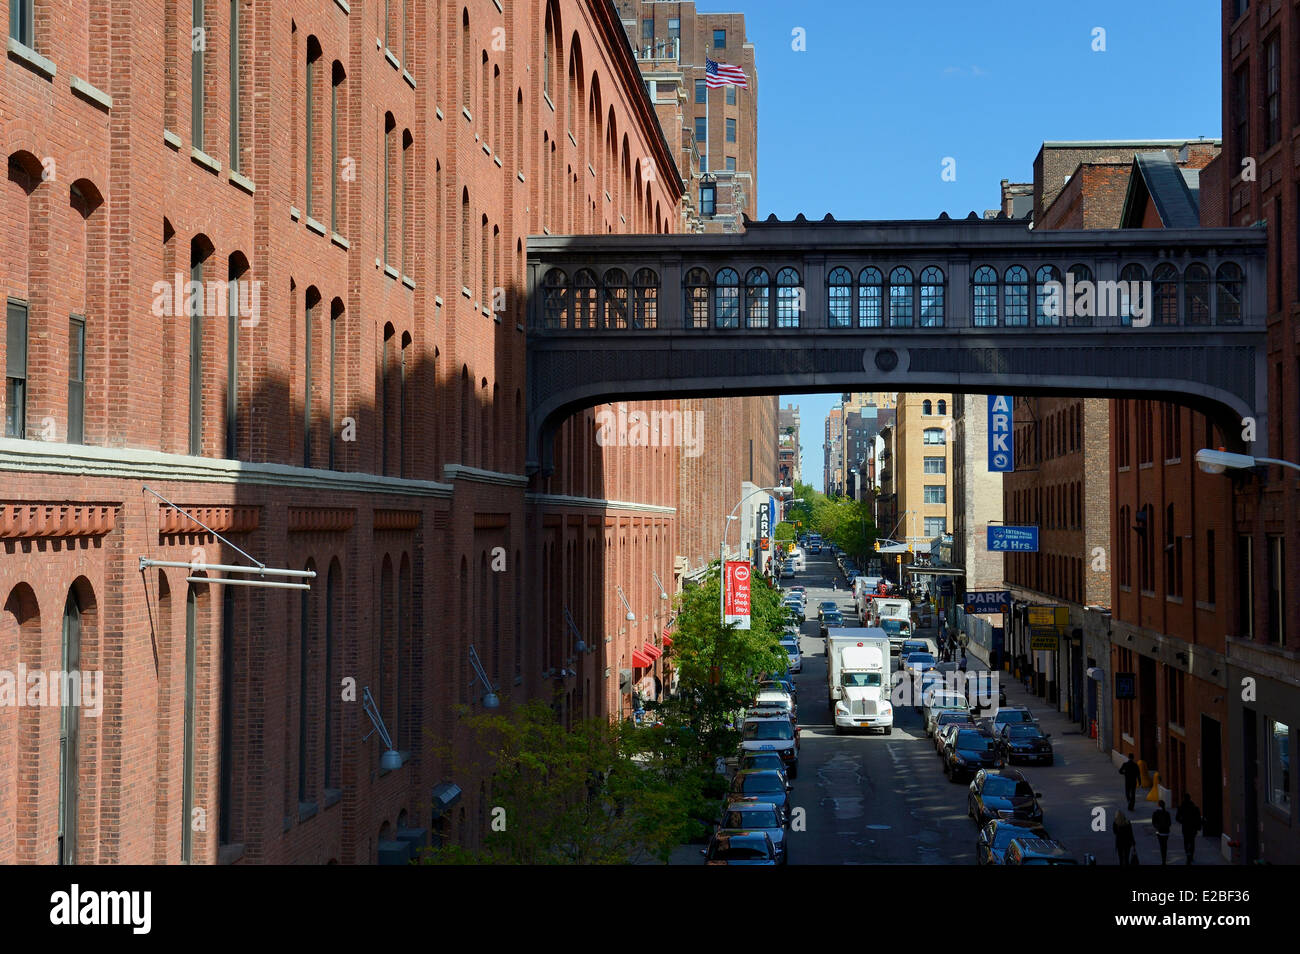 United States, New York City, Manhattan, Meatpacking District (Gansevoort Market), footbridge at the Chelsea Market building on Stock Photo